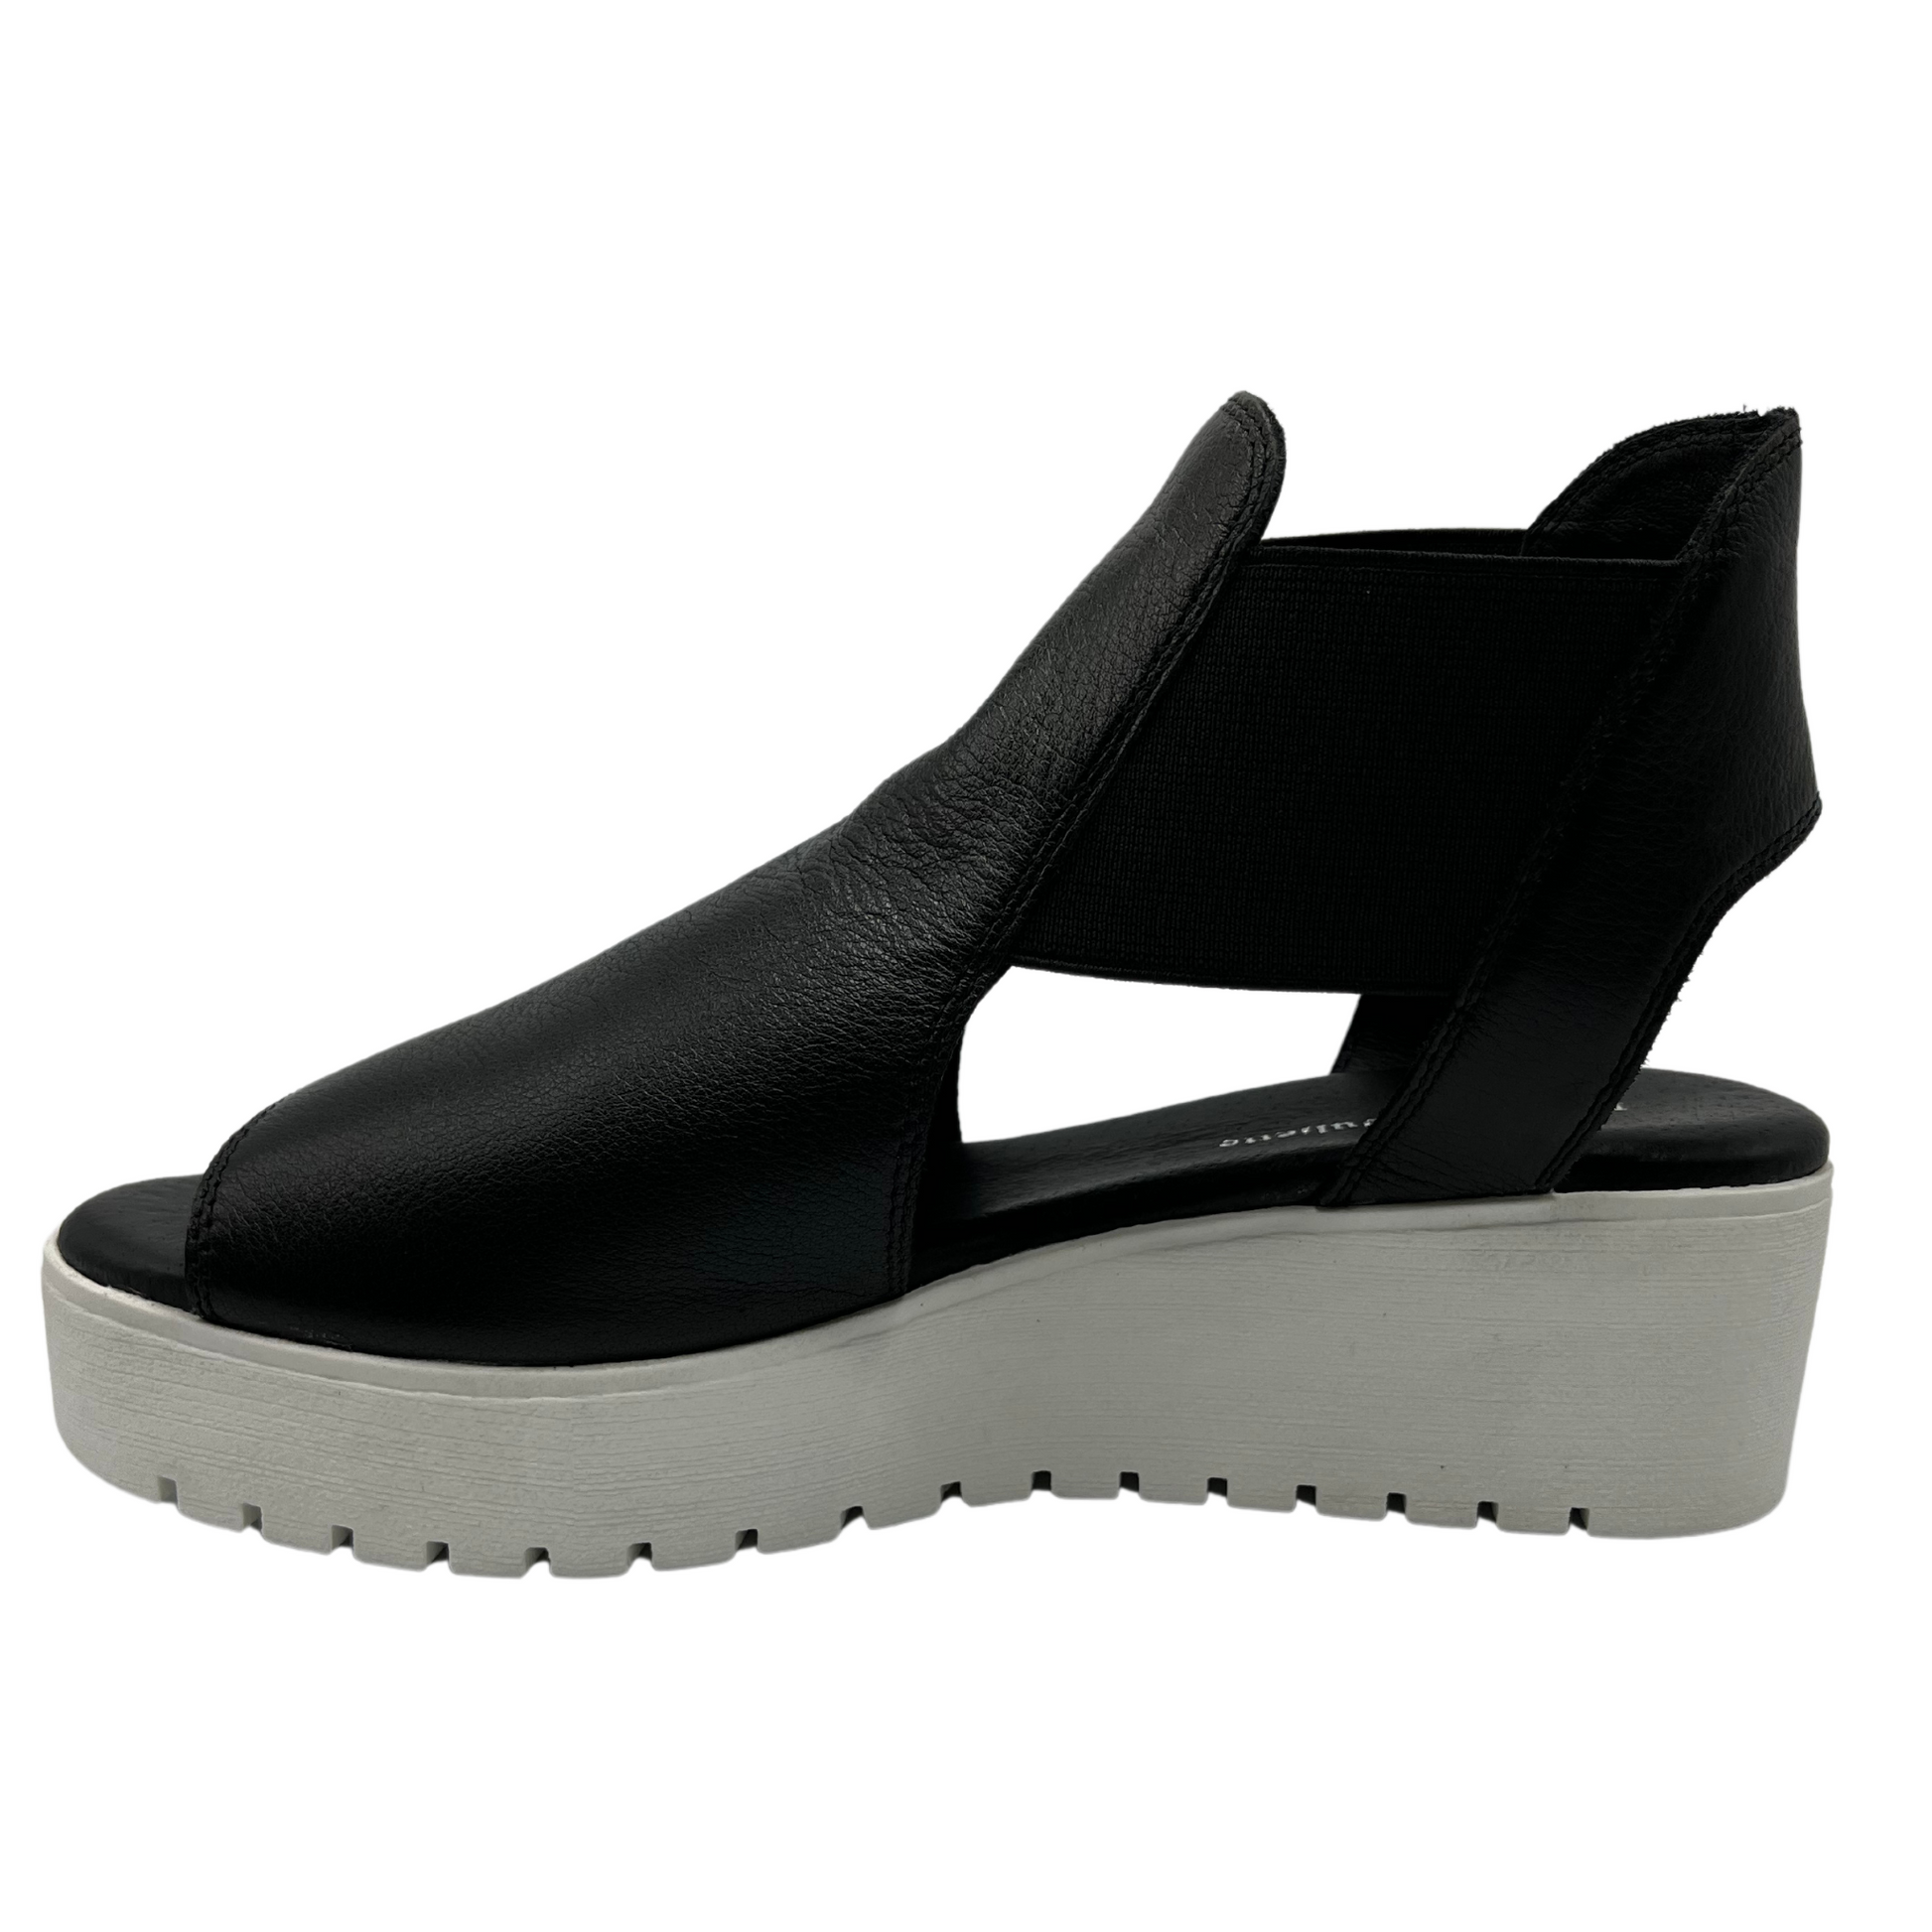 Left facing view of black leather sandal with elastic side straps and low wedge heel